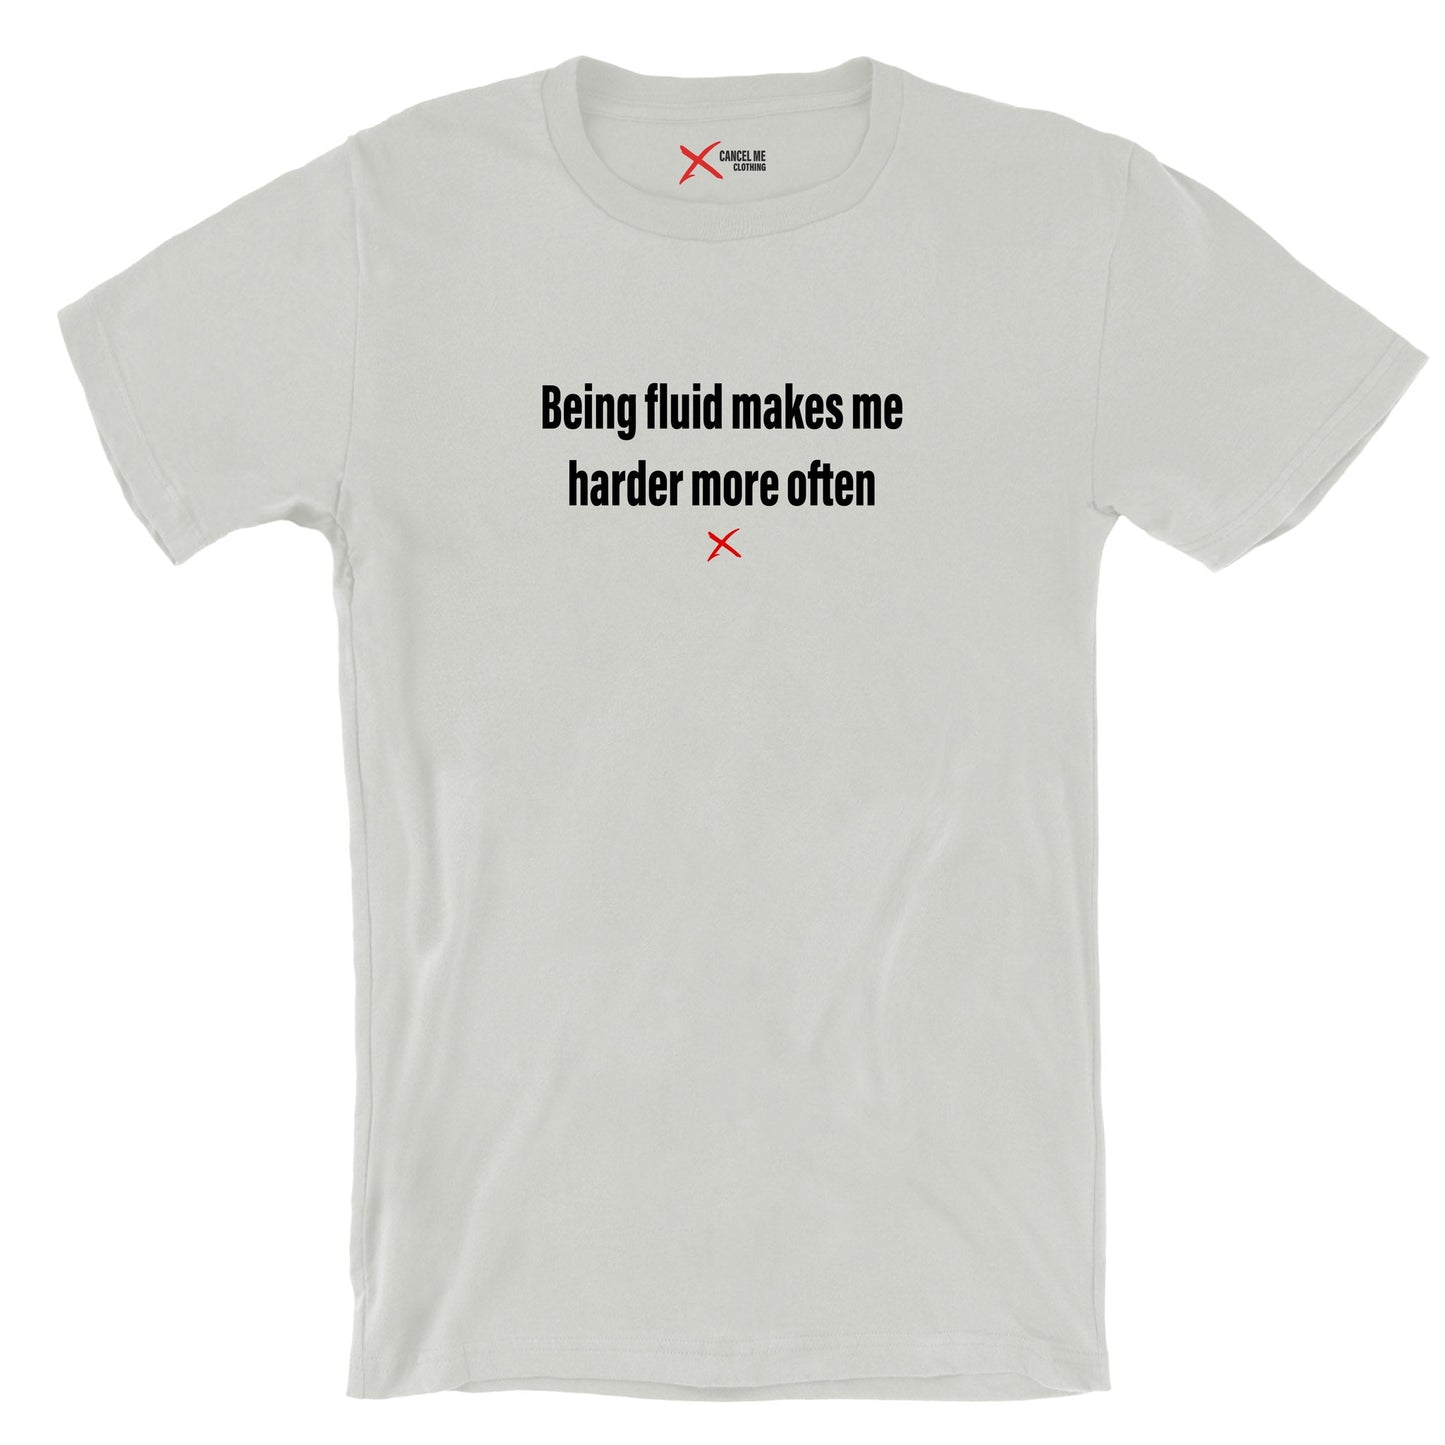 Being fluid makes me harder more often - Shirt